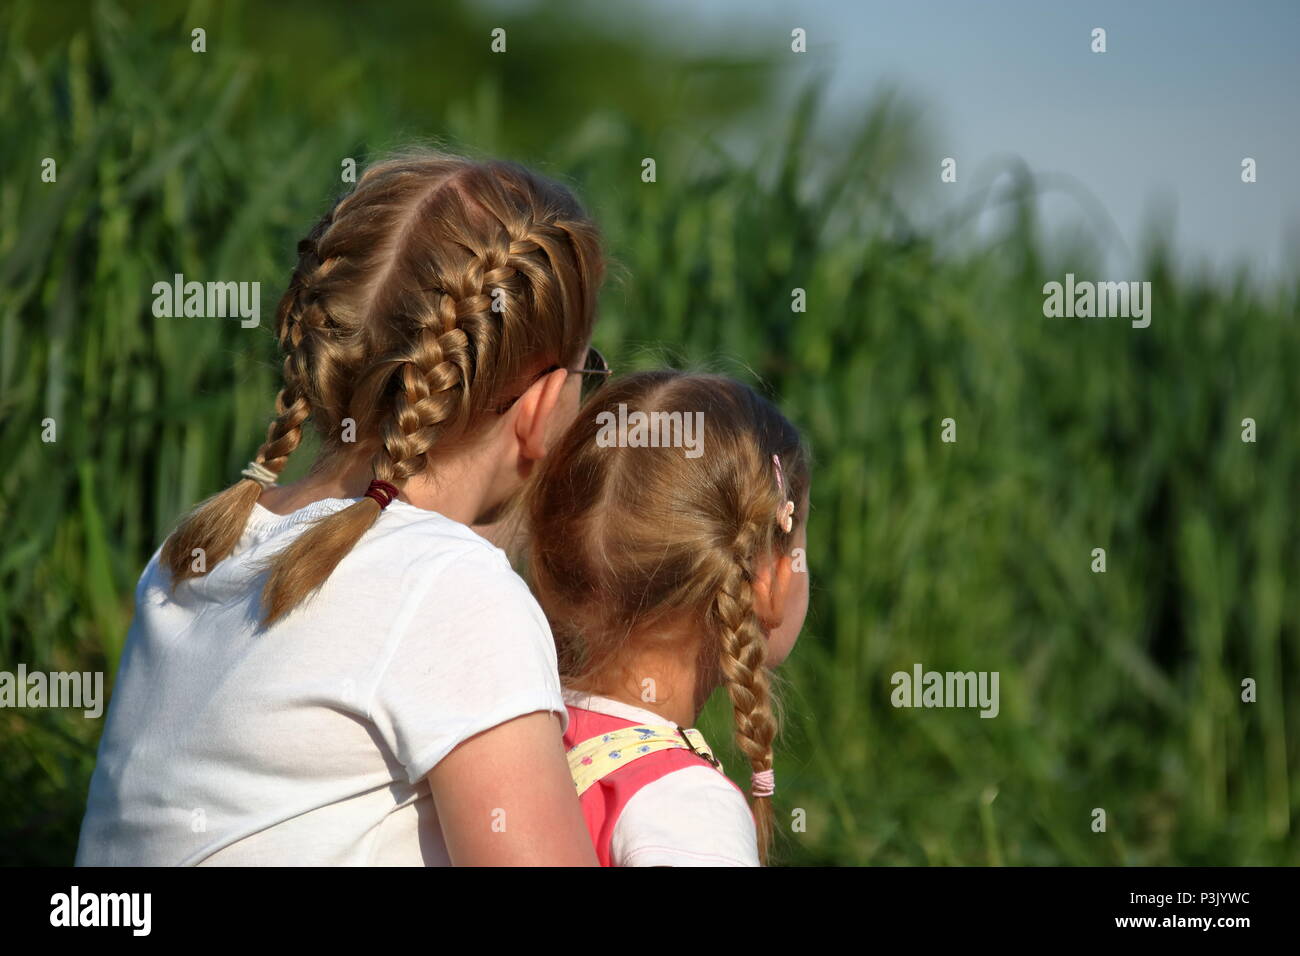 Two blond-haired children, girls, sisters, sit on their back, outdoor, have braids, green plants in background Stock Photo